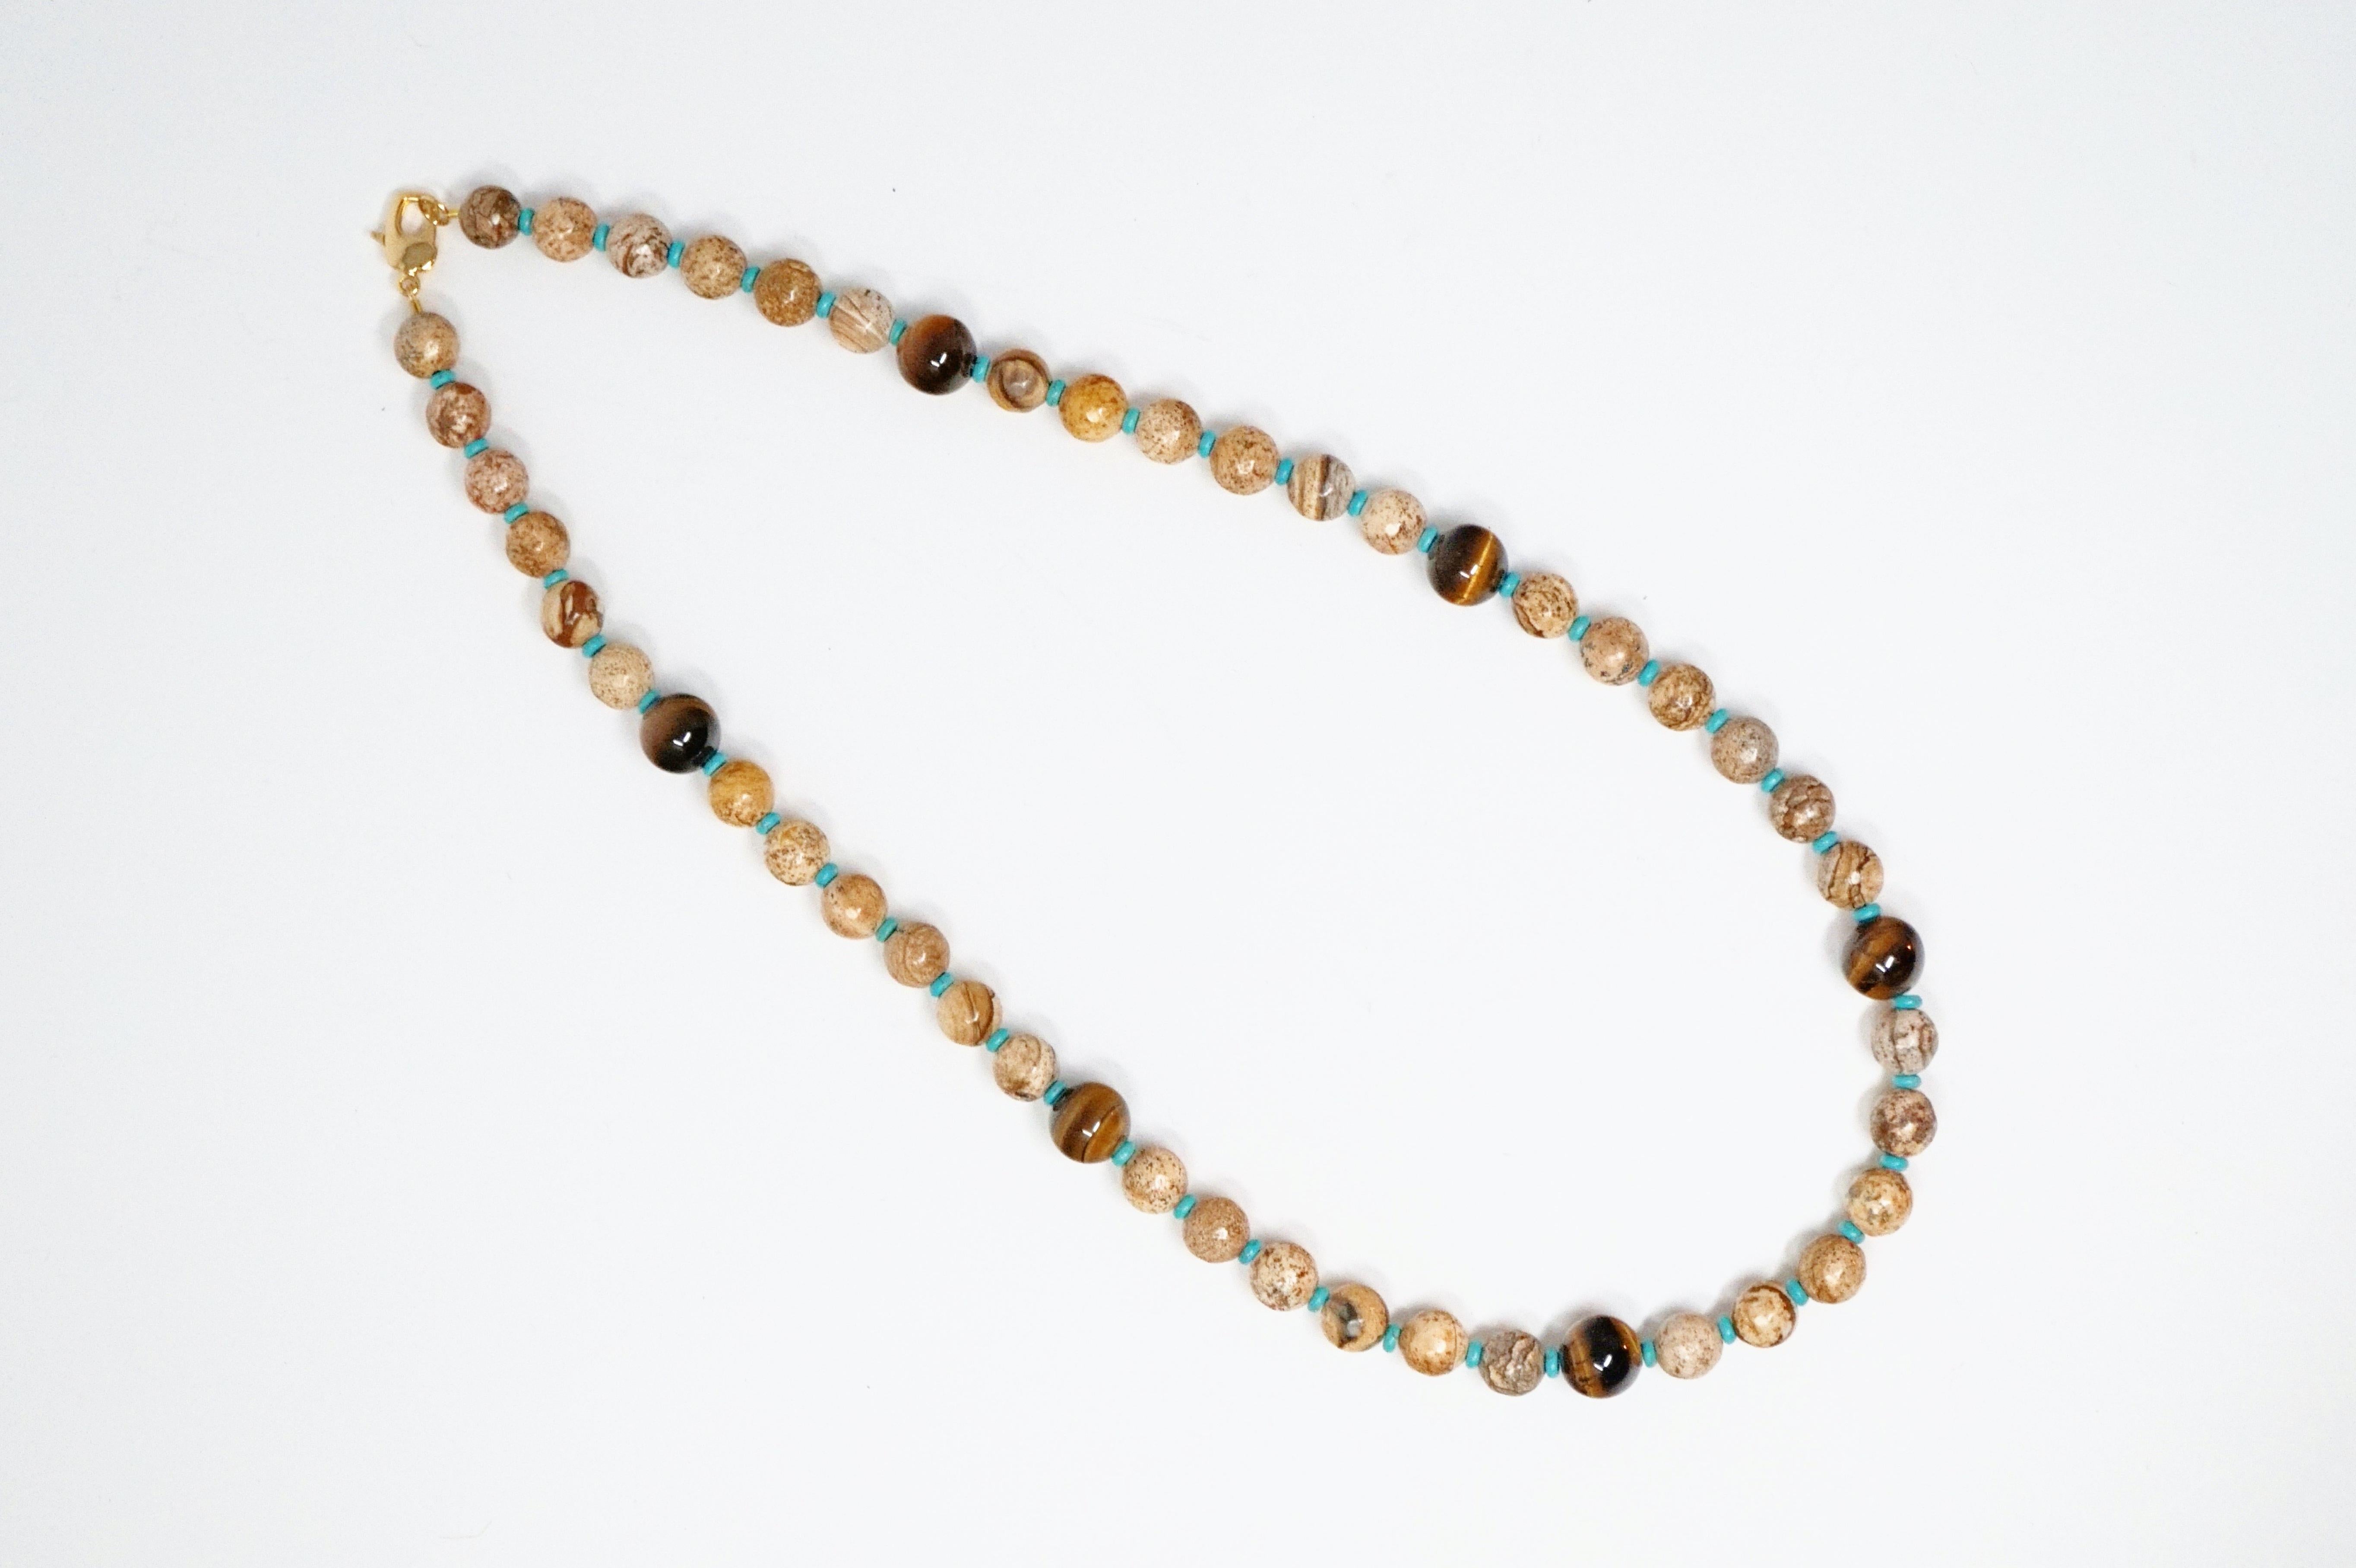 Gorgeous natural Picture Jasper gemstone necklace accented with Tiger's Eye and Turquoise.

DETAILS:
- Natural Picture Jasper, Tiger's Eye and Turquoise gemstones
- 10mm Picture Jasper beads and 12mm Grade A Tiger's Eye beads
- Gold-plated lobster